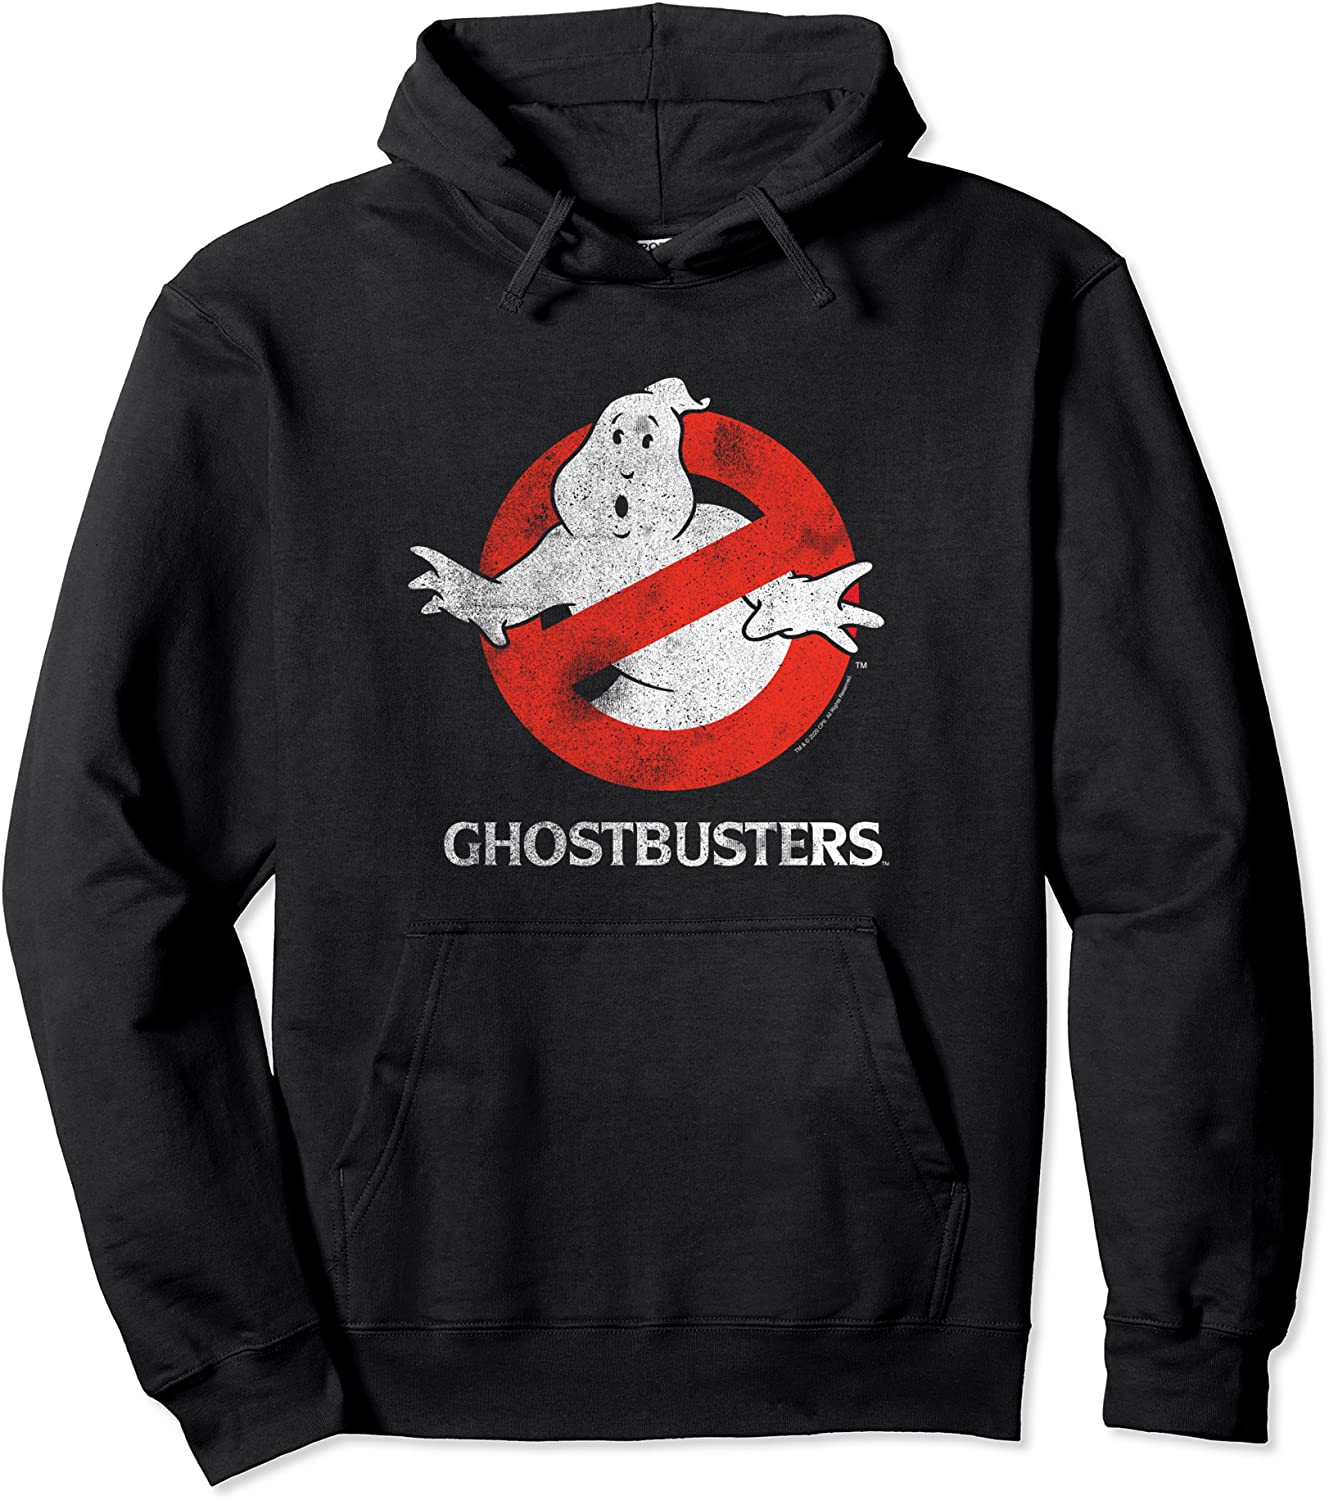 Ghostbusters Vintage Logo Pullover Hoodie - Do You Even Nerd?